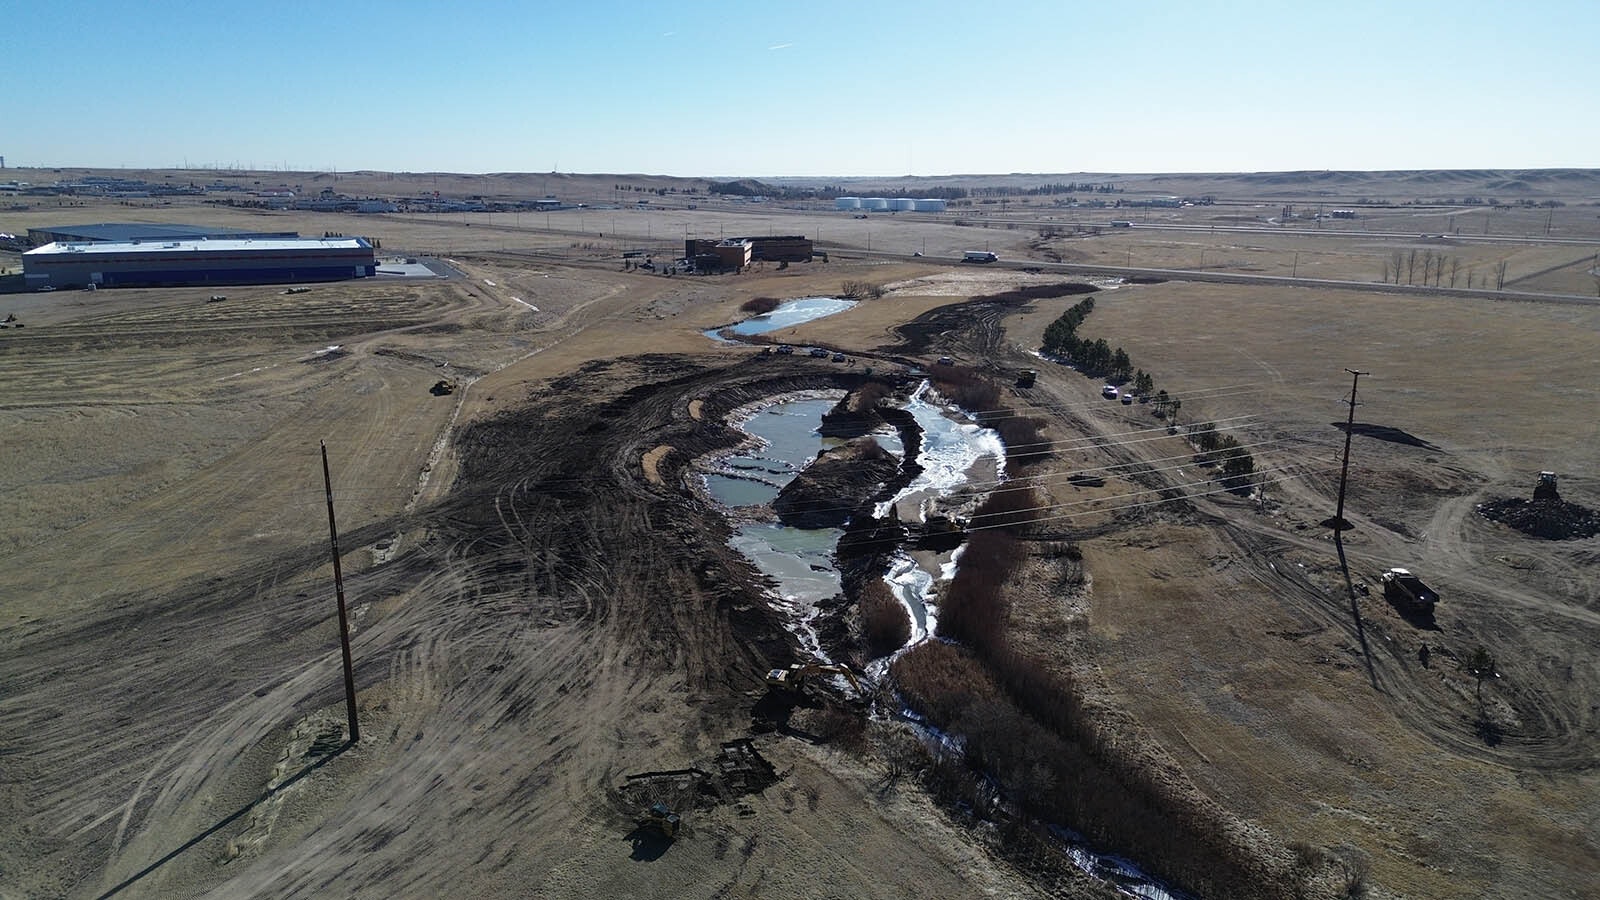 This view, looking southeast and downstream on Dry Creek, shows the extent of a fishing pond project on the Cheyenne Business Parkway. The Eagle Claw fishing gear factory is visible on the left.